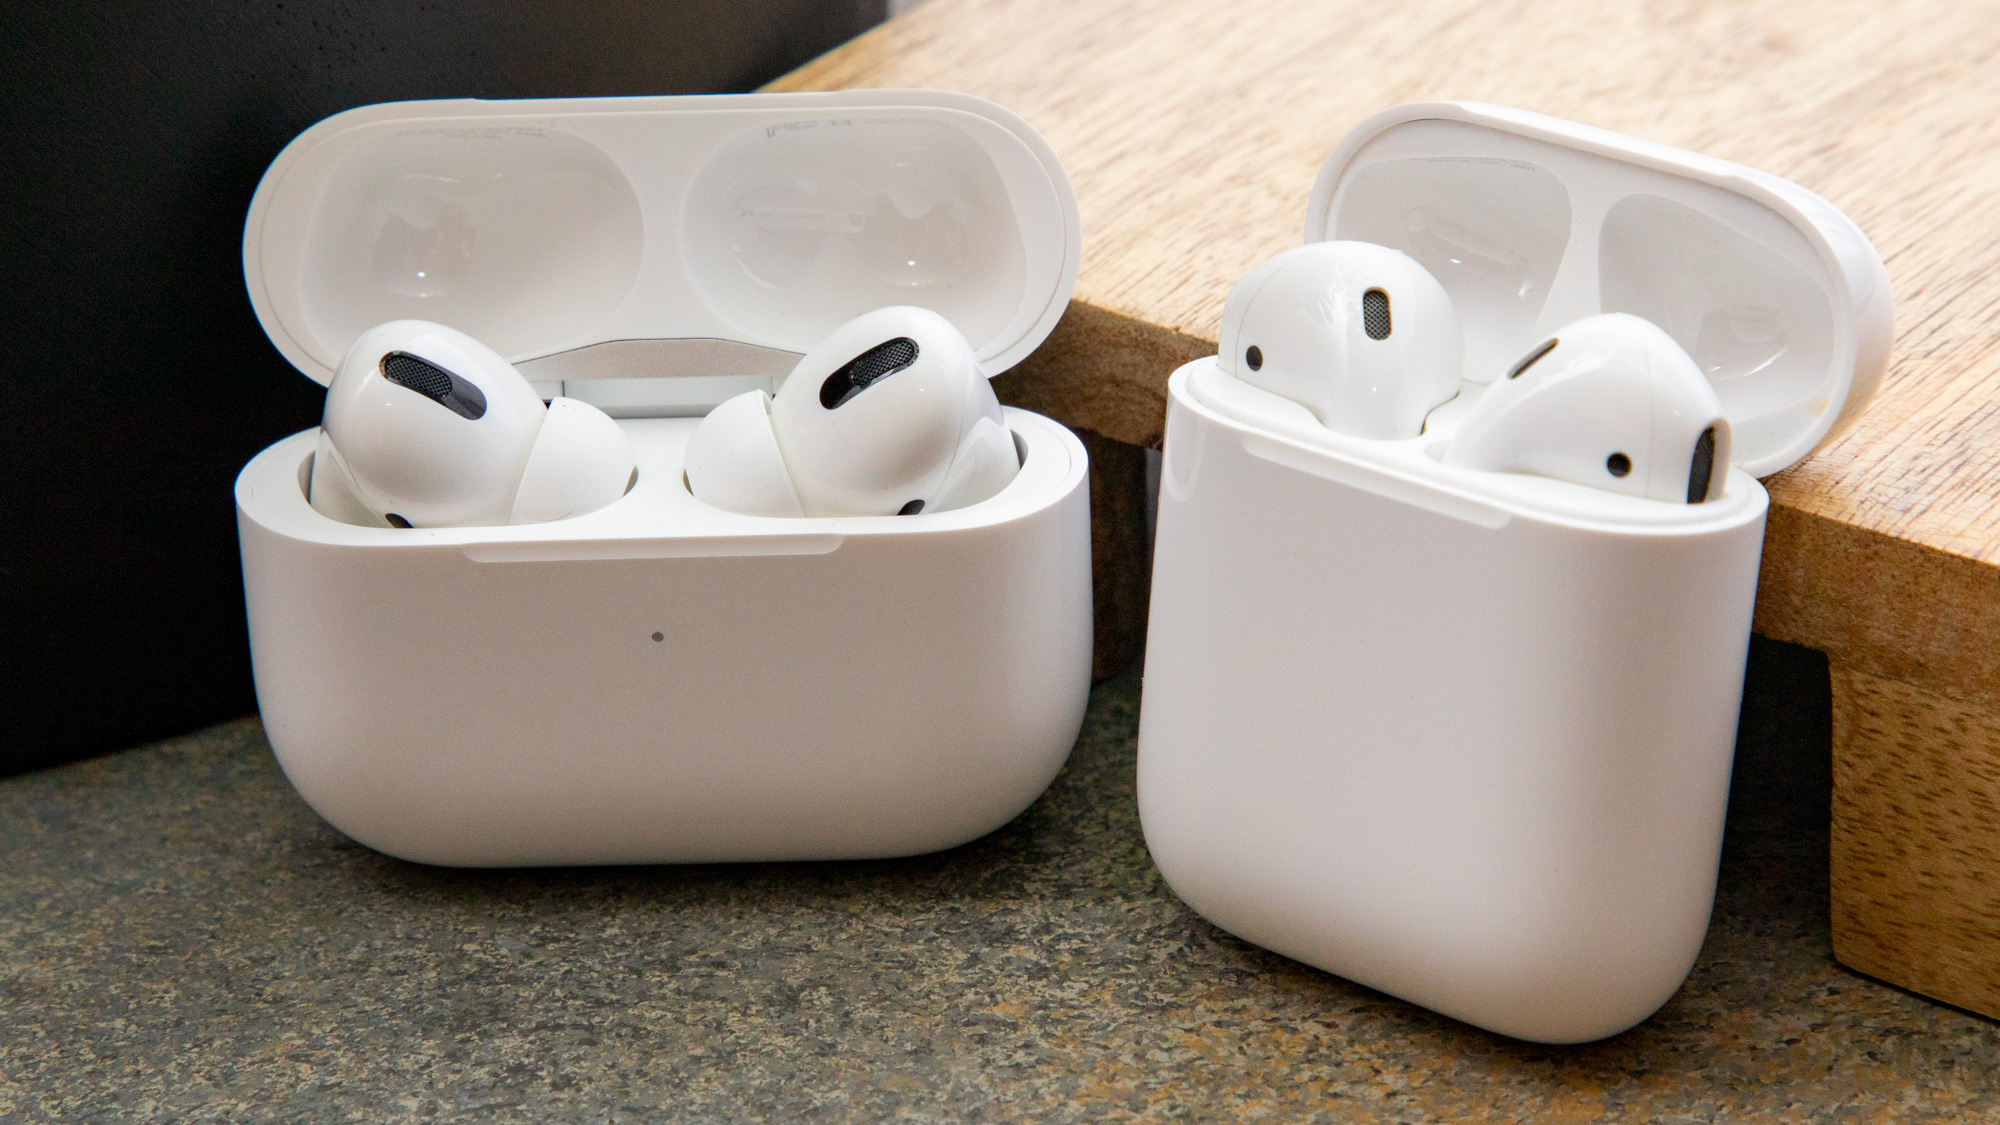 Apple AirPods vs AirPods Pro: which wireless earbuds are better